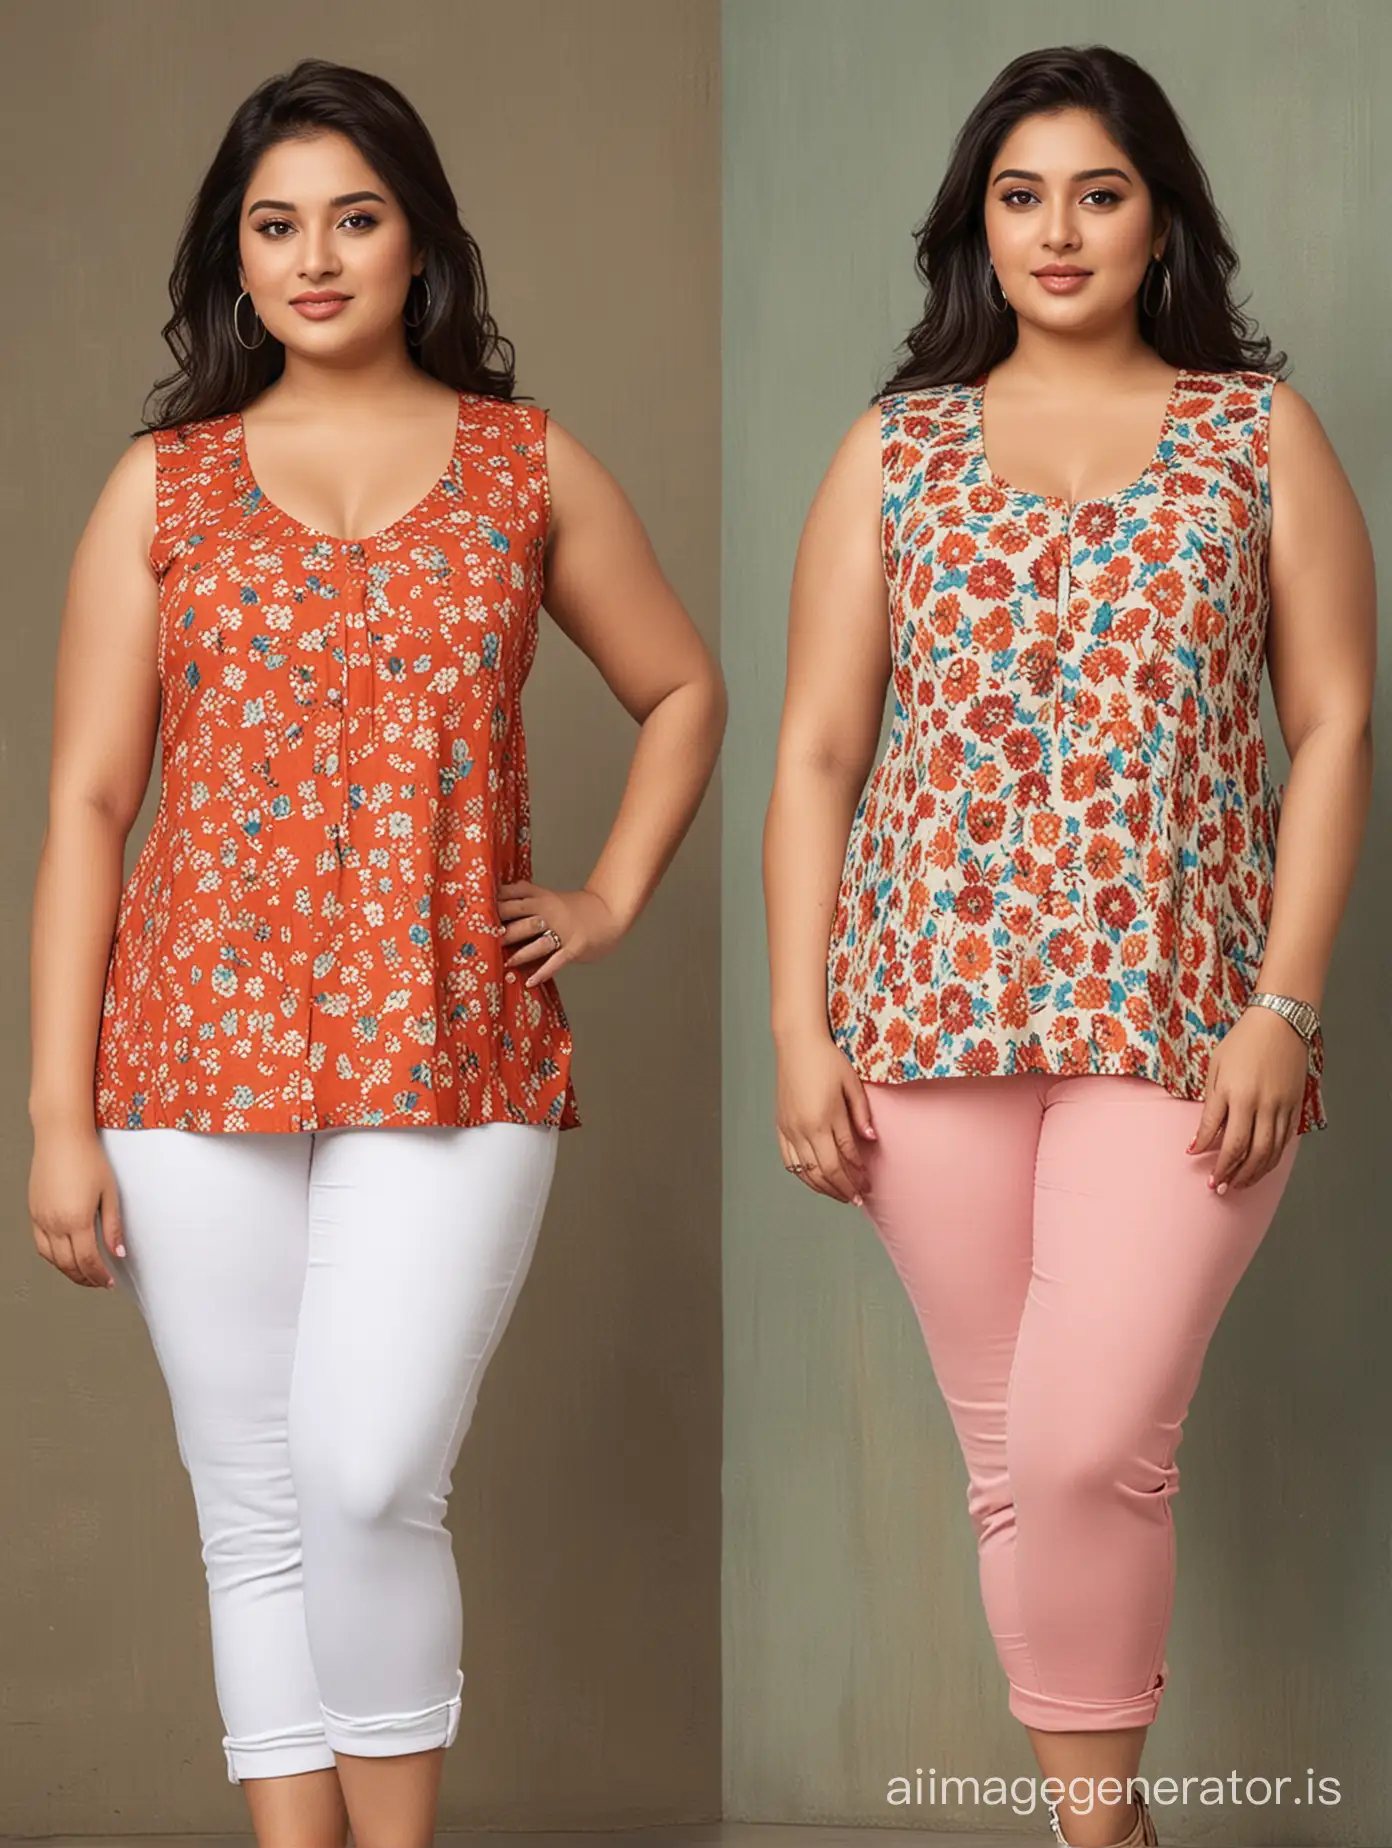 Stylish-Plus-Size-Indian-Women-in-Sleeveless-Tops-with-Pillows